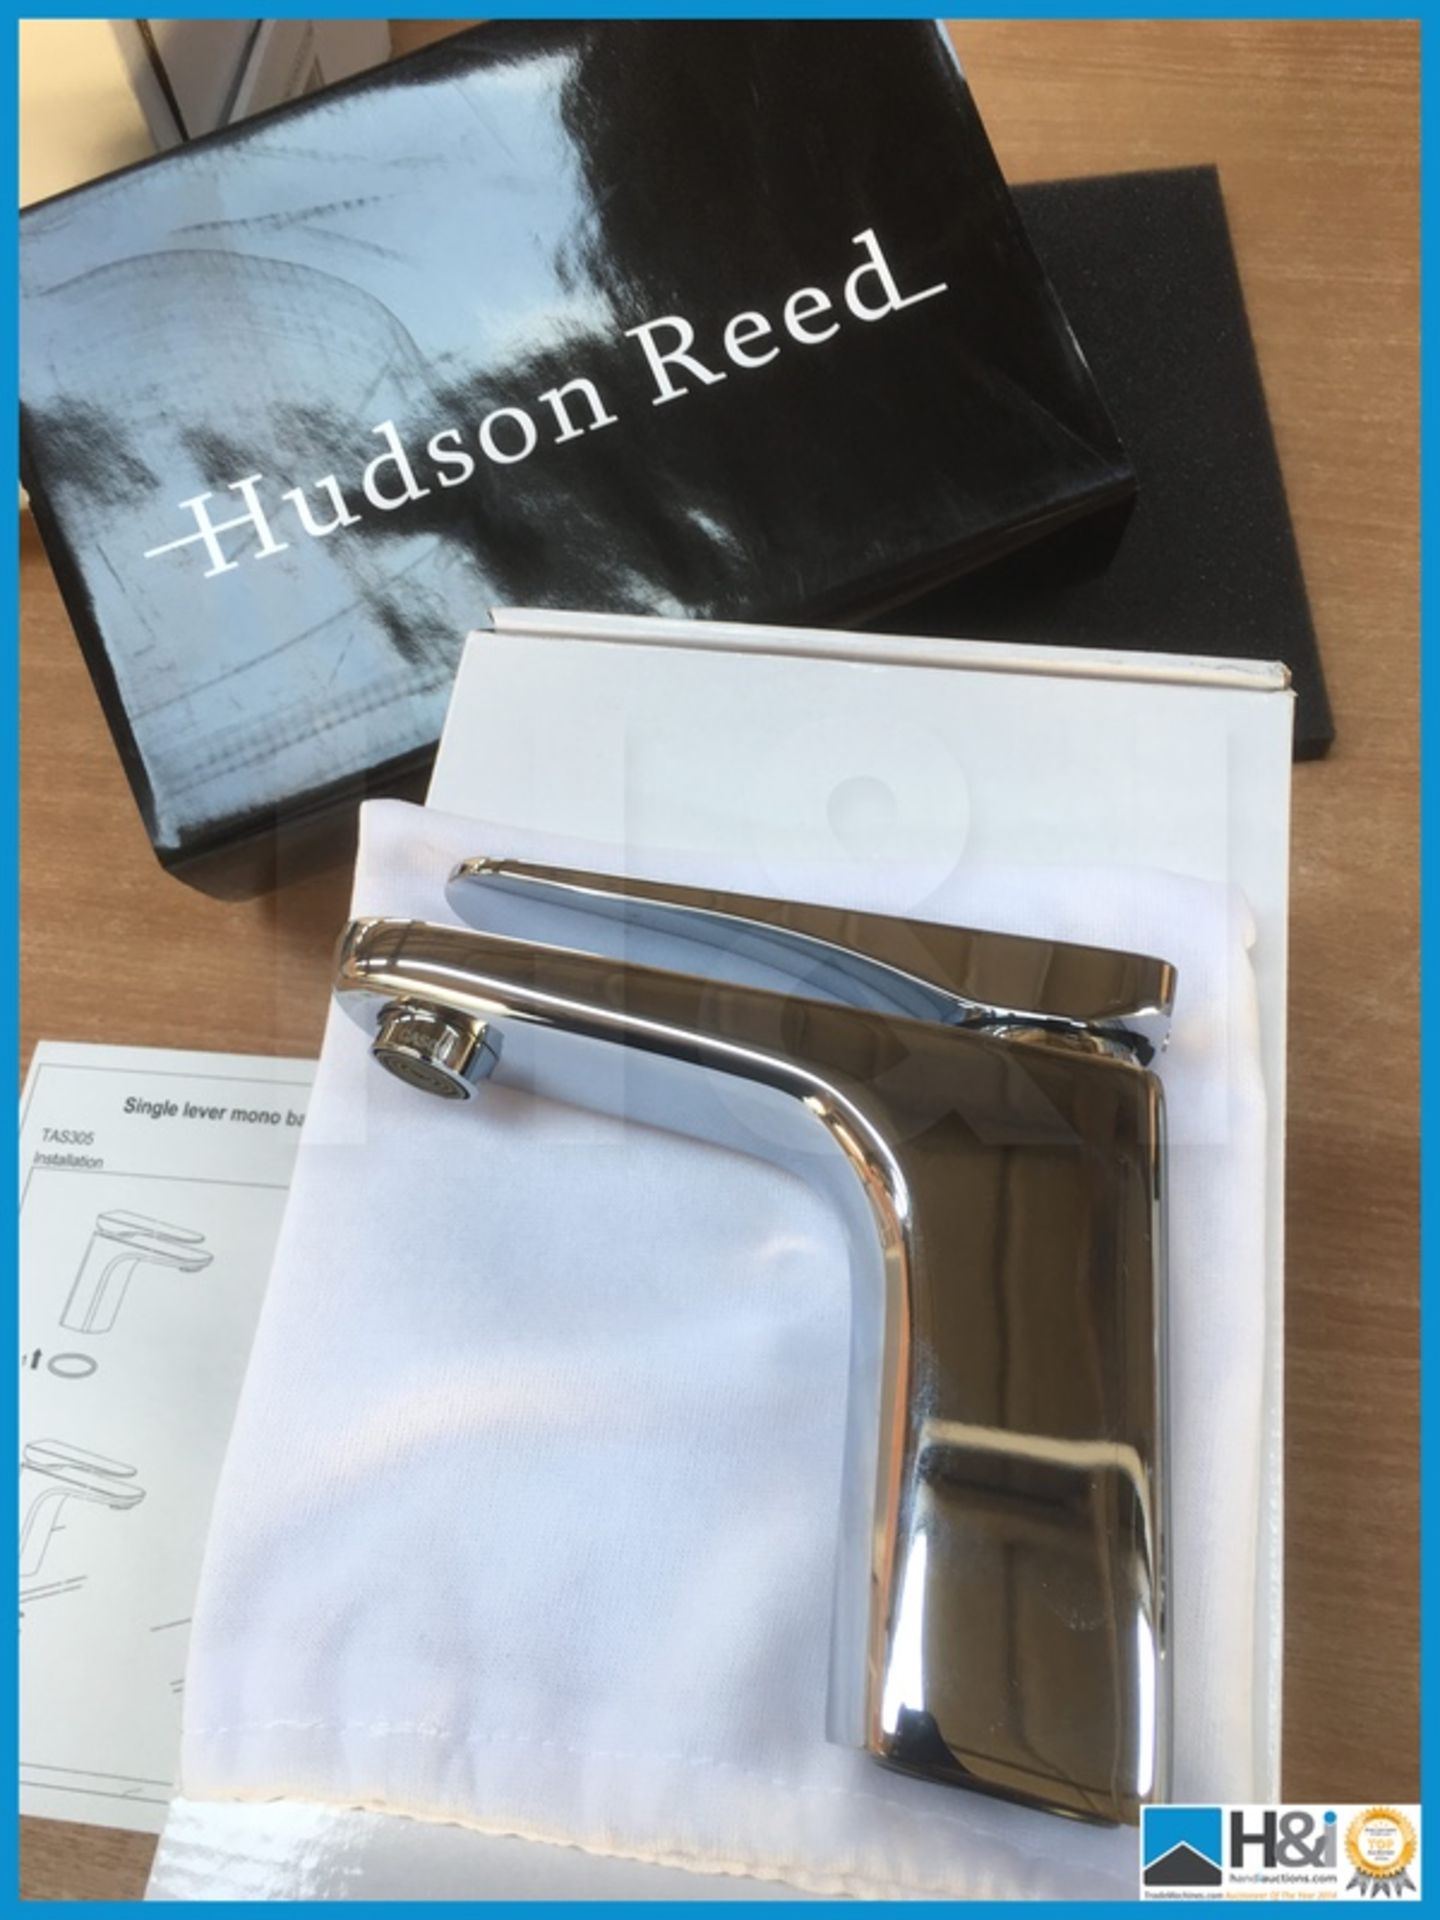 Hudson Reed TAS 305 Aspire mono basin mixer in polished chrome. New and boxed. Suggested